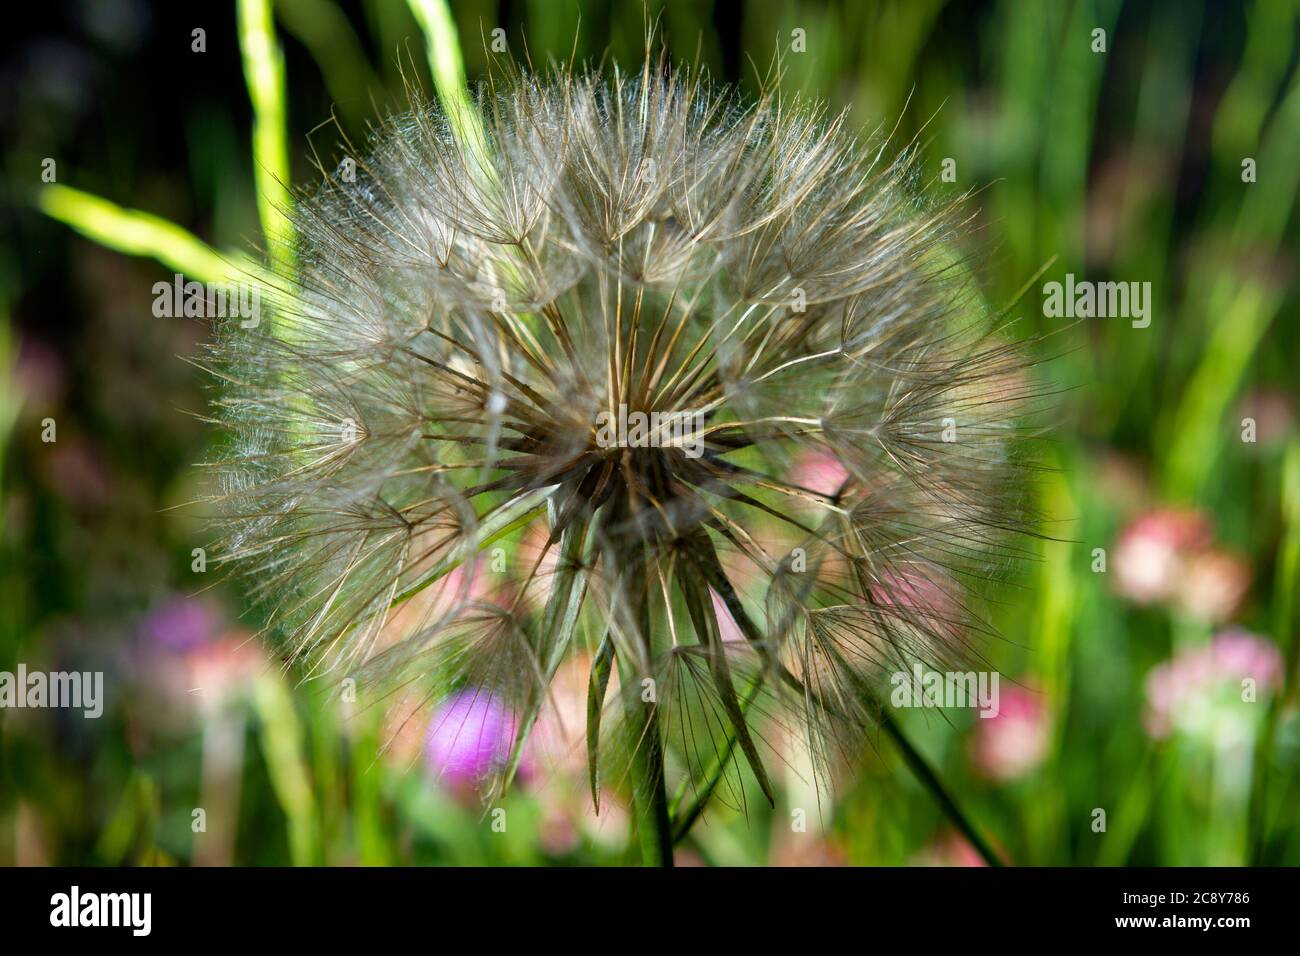 Dandelion flower in spring, photographed very closely Stock Photo